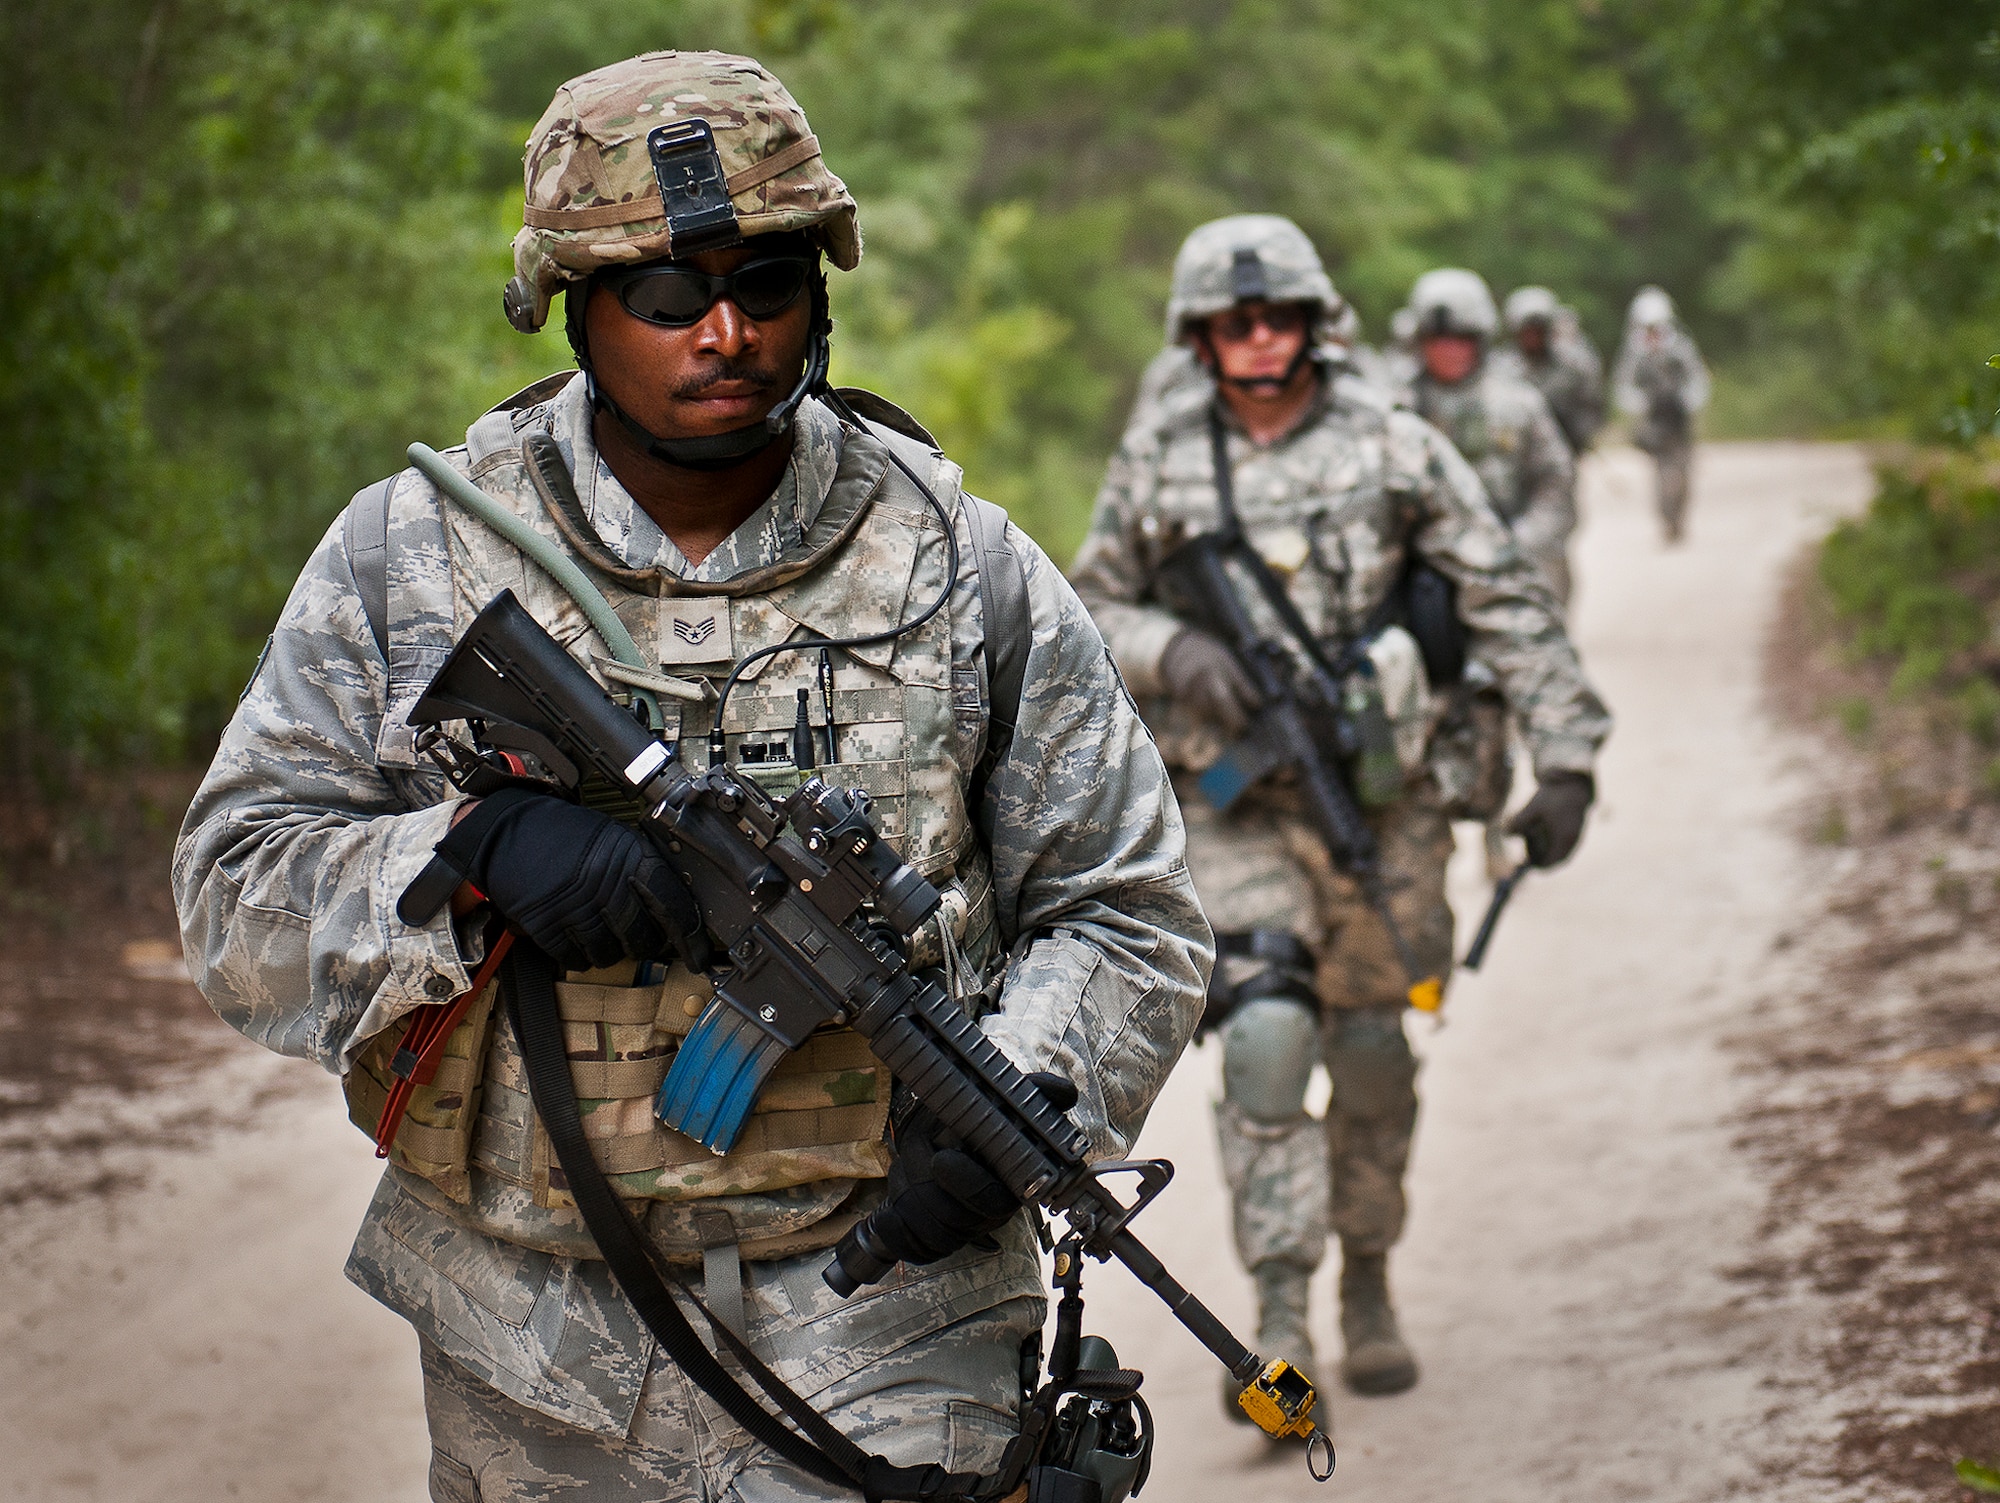 Staff Sgt. Marcus Dobbins, of the 164th Security Force Squadron, leads the way during a dismounted patrol as part of the three-day Brave Defender field training exercise May 19 at Eglin Air Force Base, Fla.  The exercise is the culmination of Air Force Materiel Command’s six-week security forces deployment training, administered by the 96th Ground Combat Training Squadron. GCTS instructors teach 10 training classes a year, which consists of improvised explosive device detection and reaction, operating in an urban environment, mission planning, land navigation and casualty care and more. More than 140 active-duty and National Guard Airmen attended this training. (U.S. Air Force photo/Samuel King Jr.)